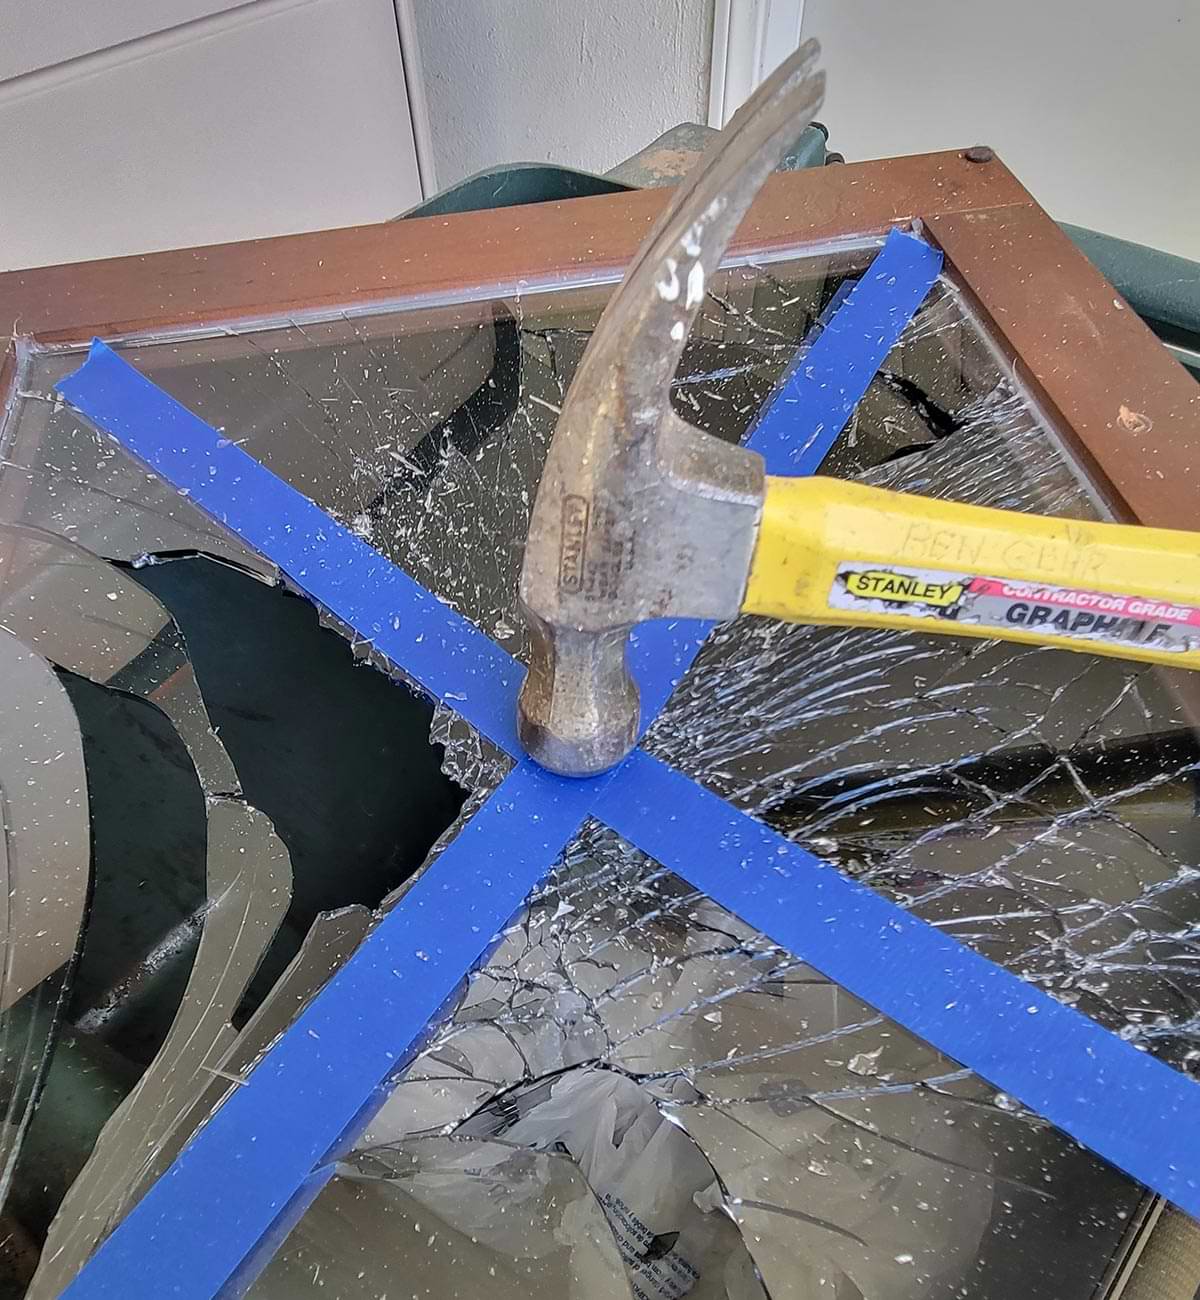 with masking tape on the glass a hammer is used to break the glass apart for removal